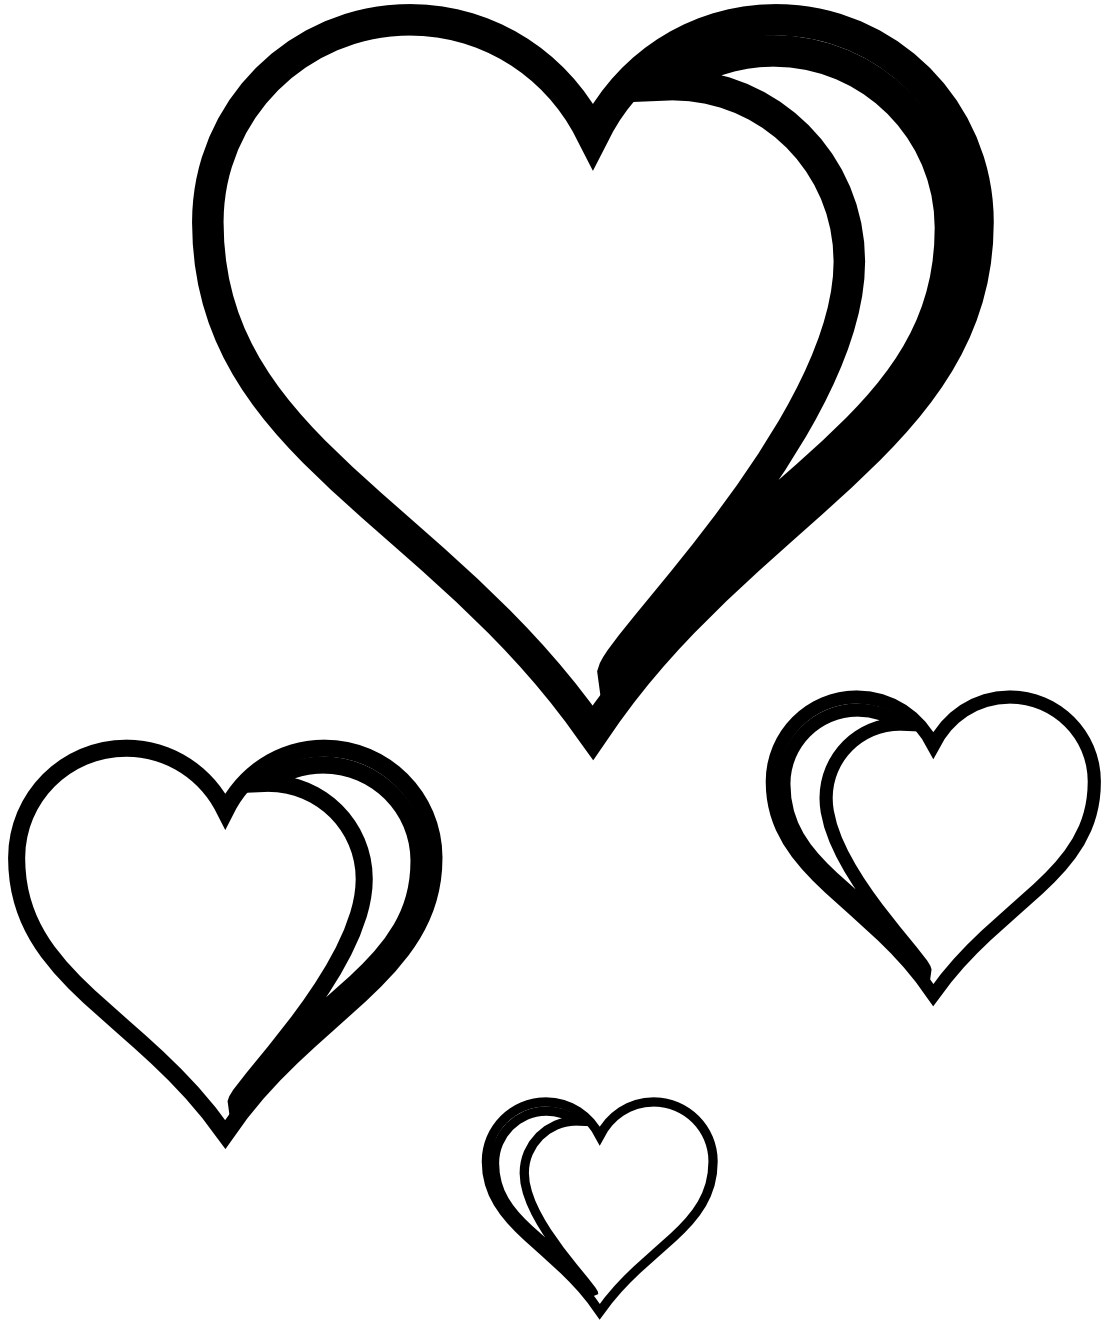 Heart black and white black and white heart outline clipart kid ...